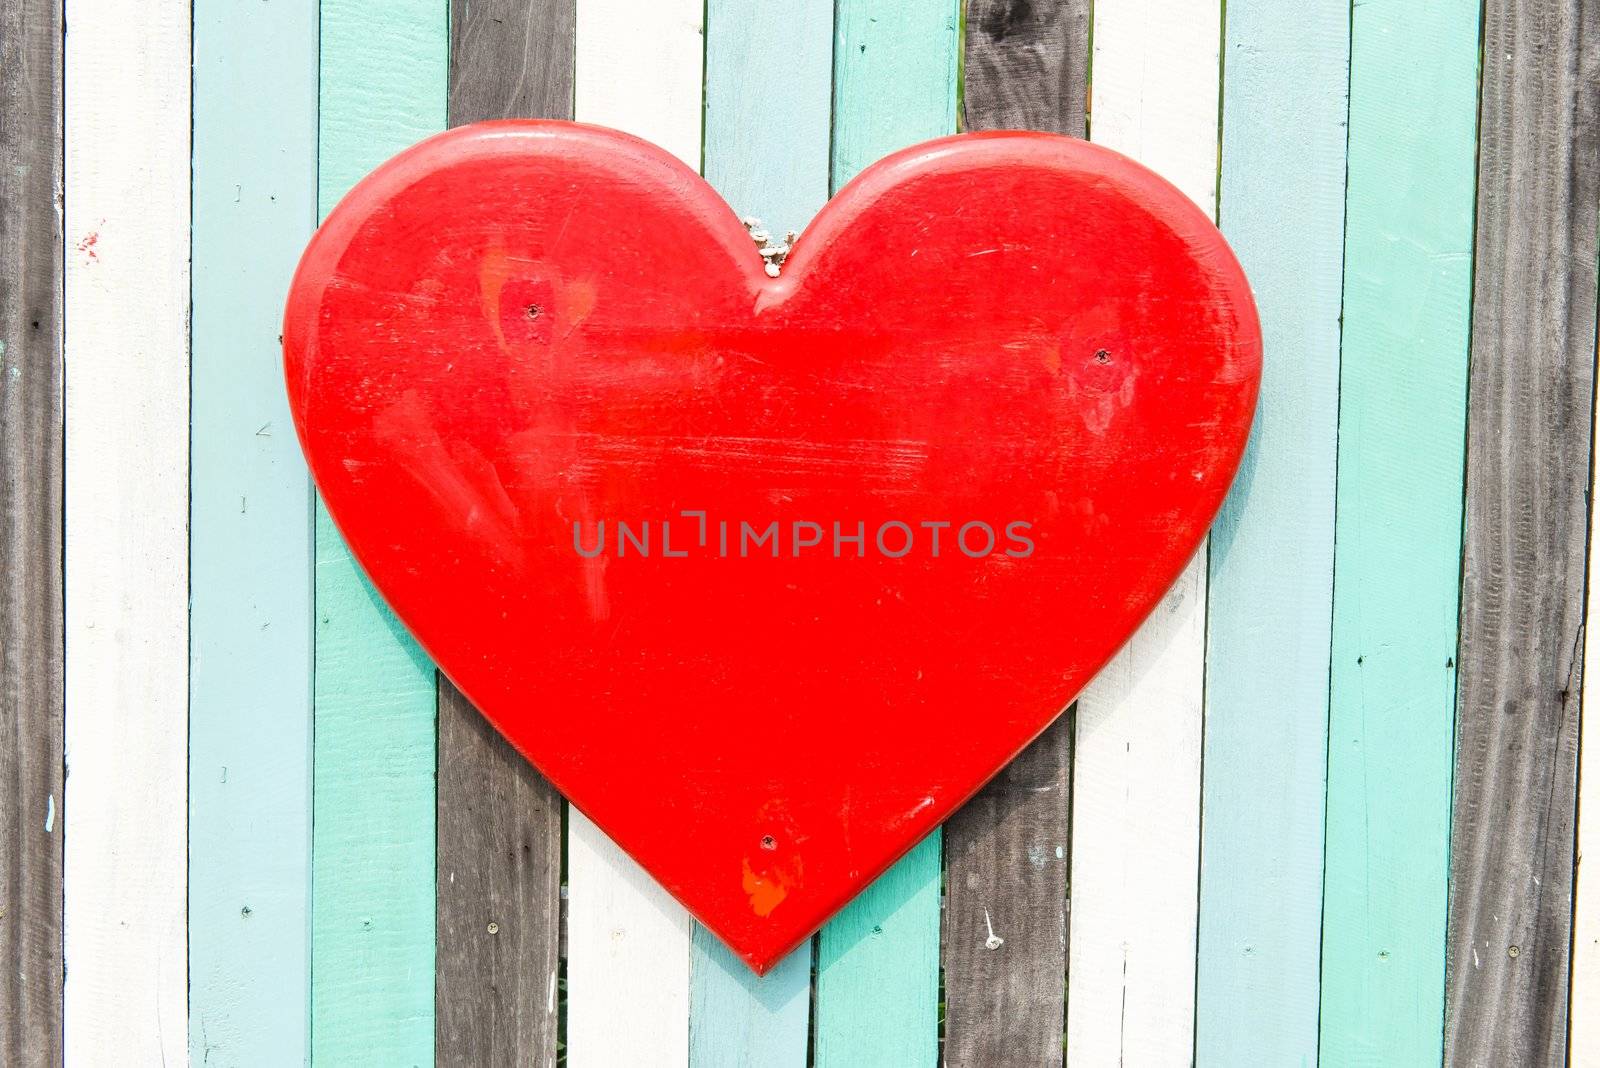 Blue, white, black contrasting old wooden texture background with heart shape, taken on a sunny day